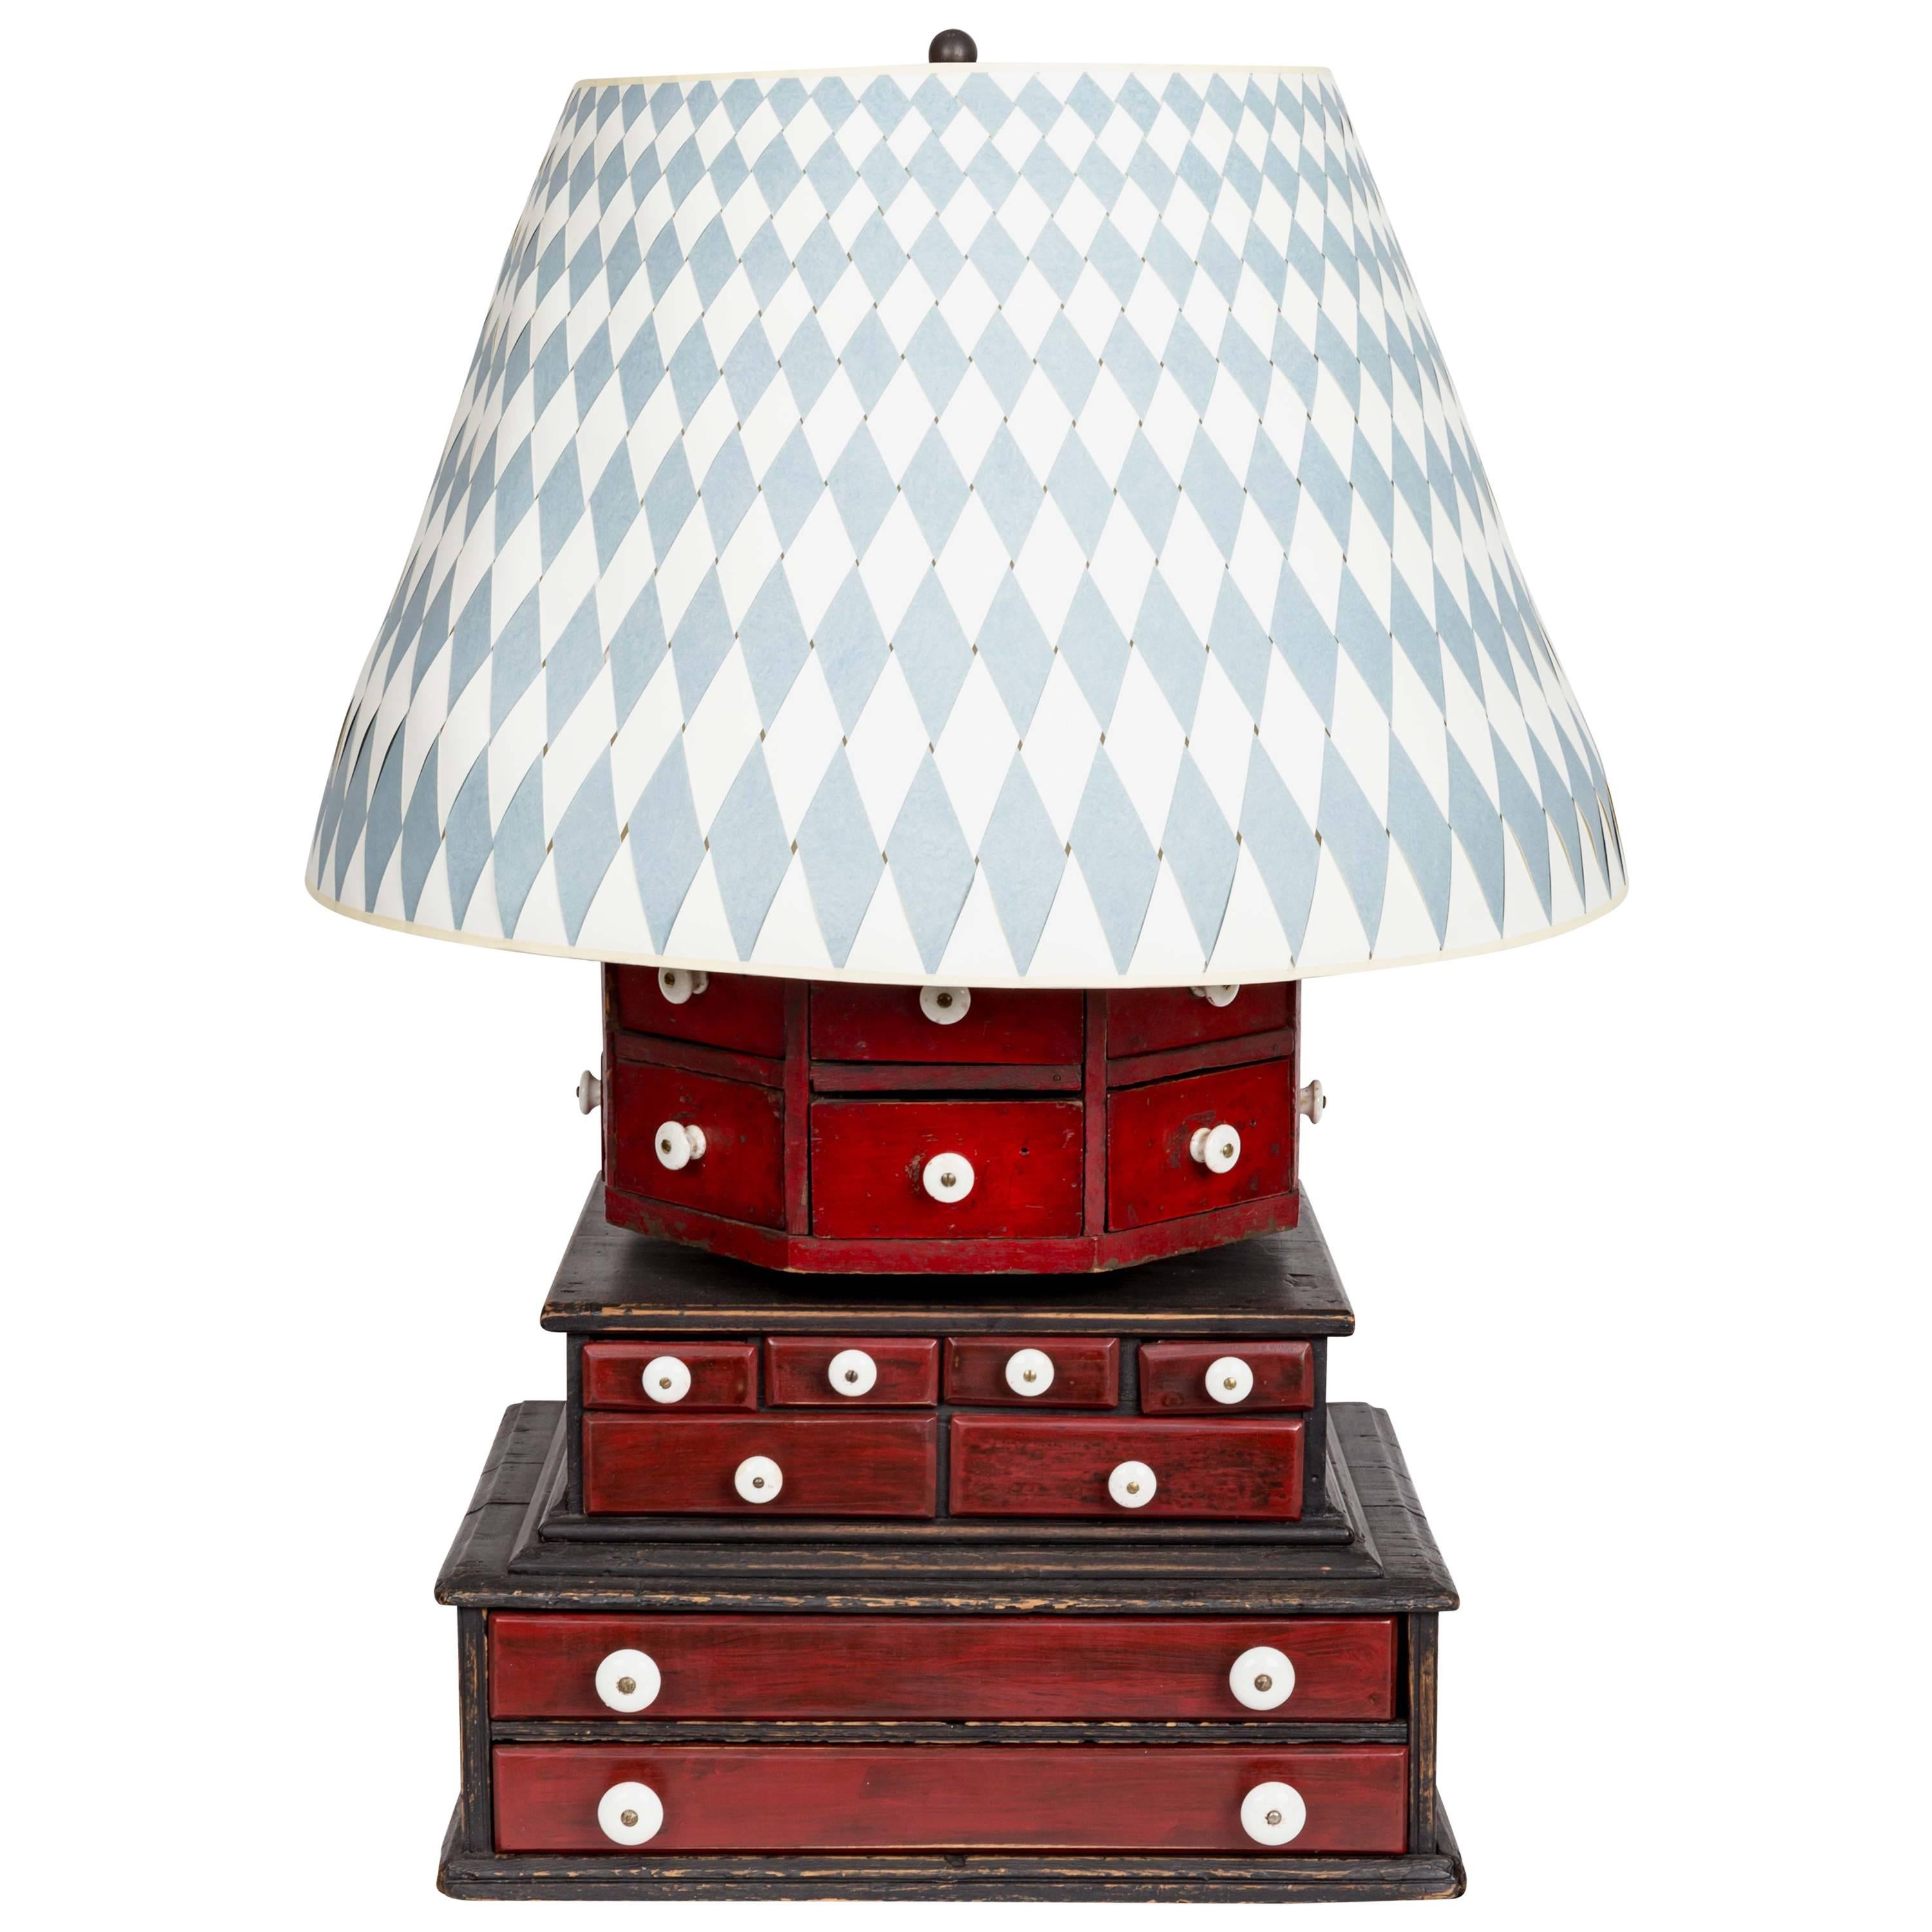 One-of-a-kind 'Diamond & Baratta' Large-Scale Sewing Box Lamp For Sale